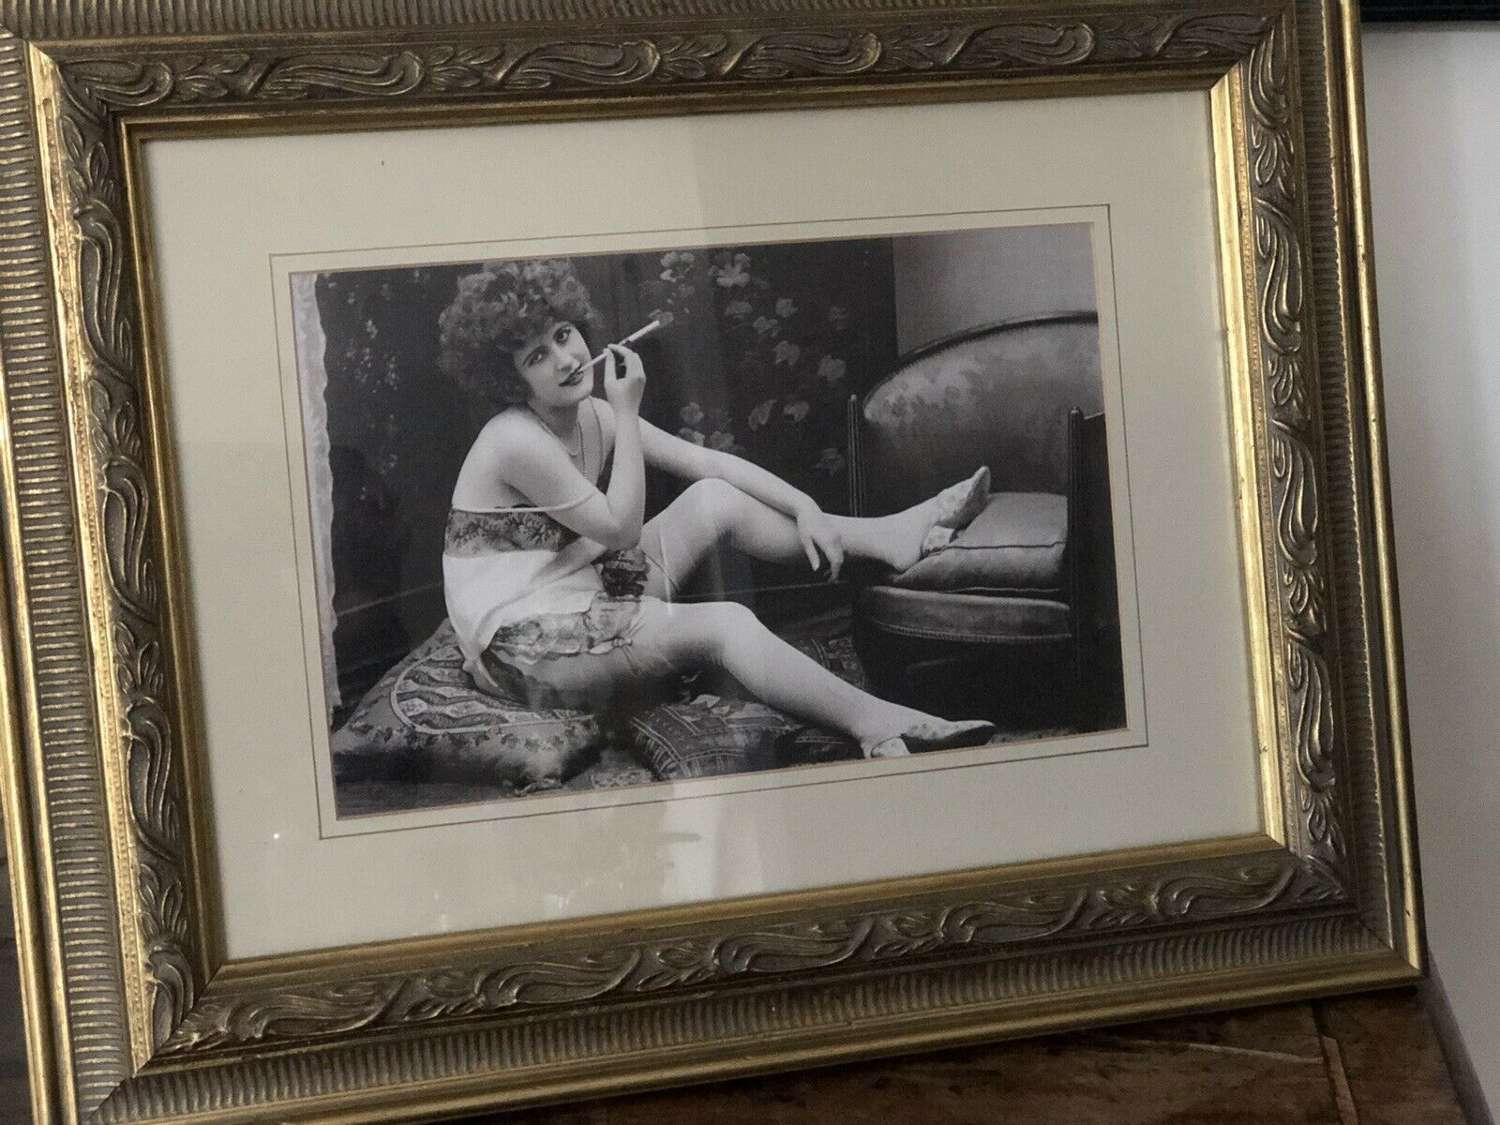 Flapper style photograph